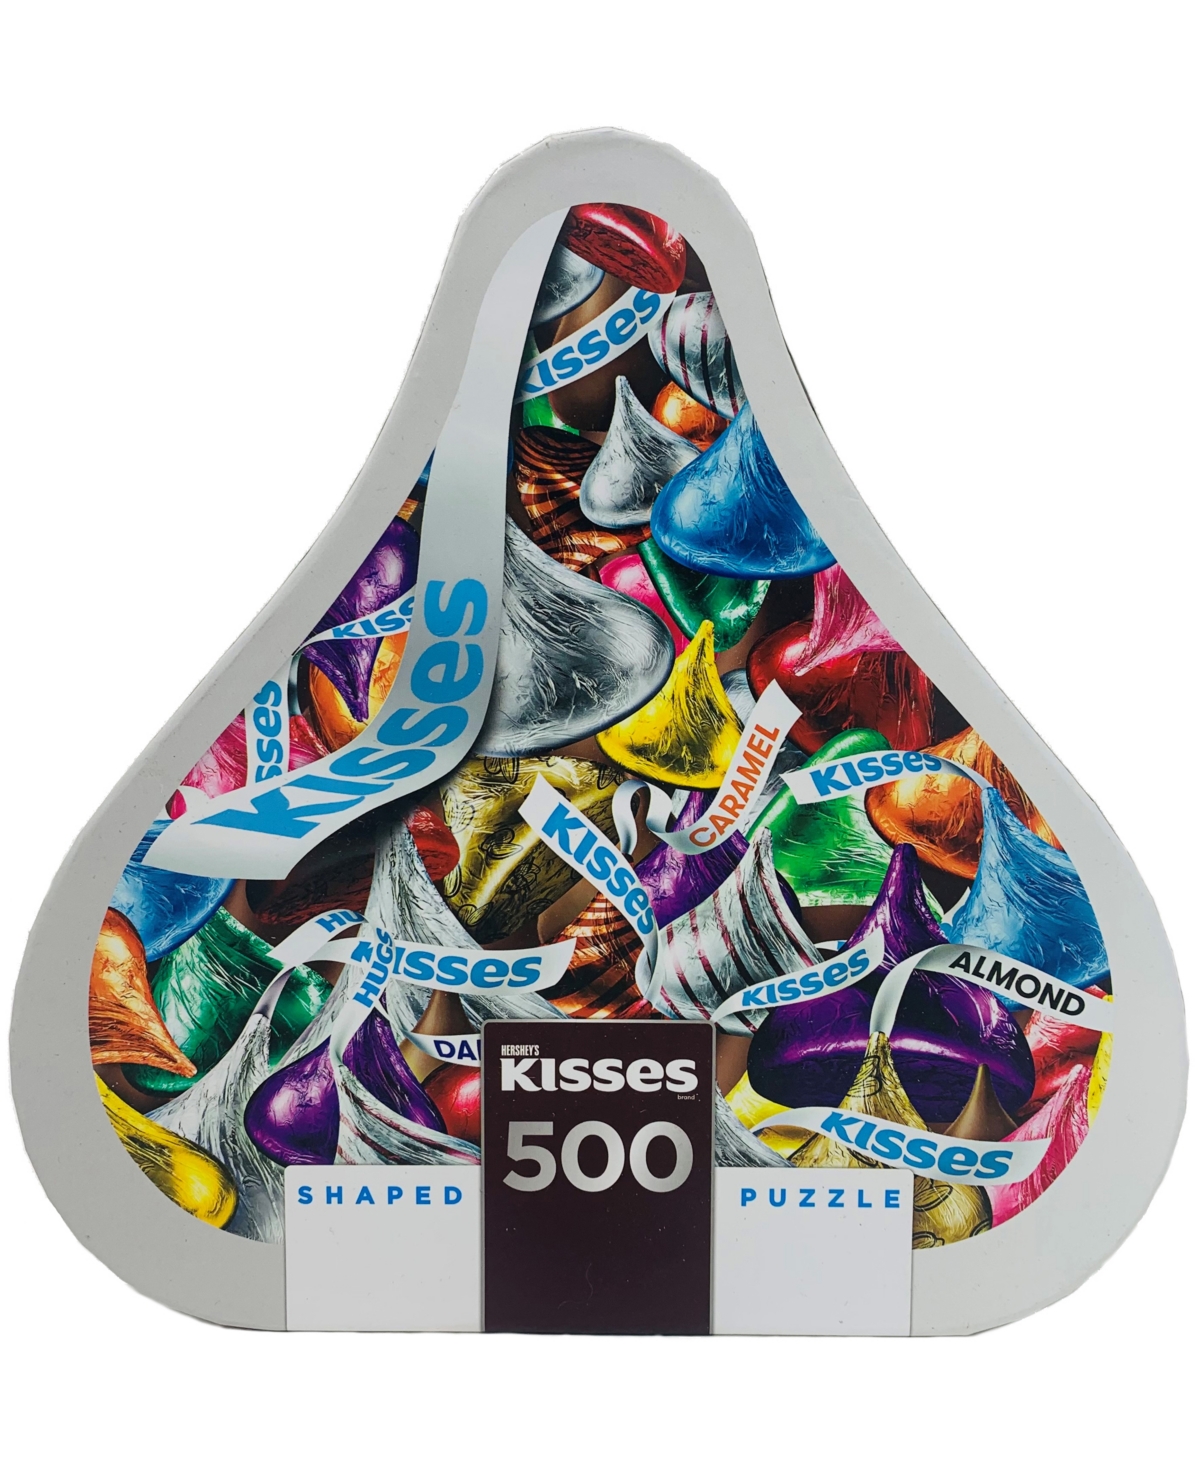 Masterpieces Puzzles Hershey's Kisses Shaped Puzzle Set, 500 Piece In Multi